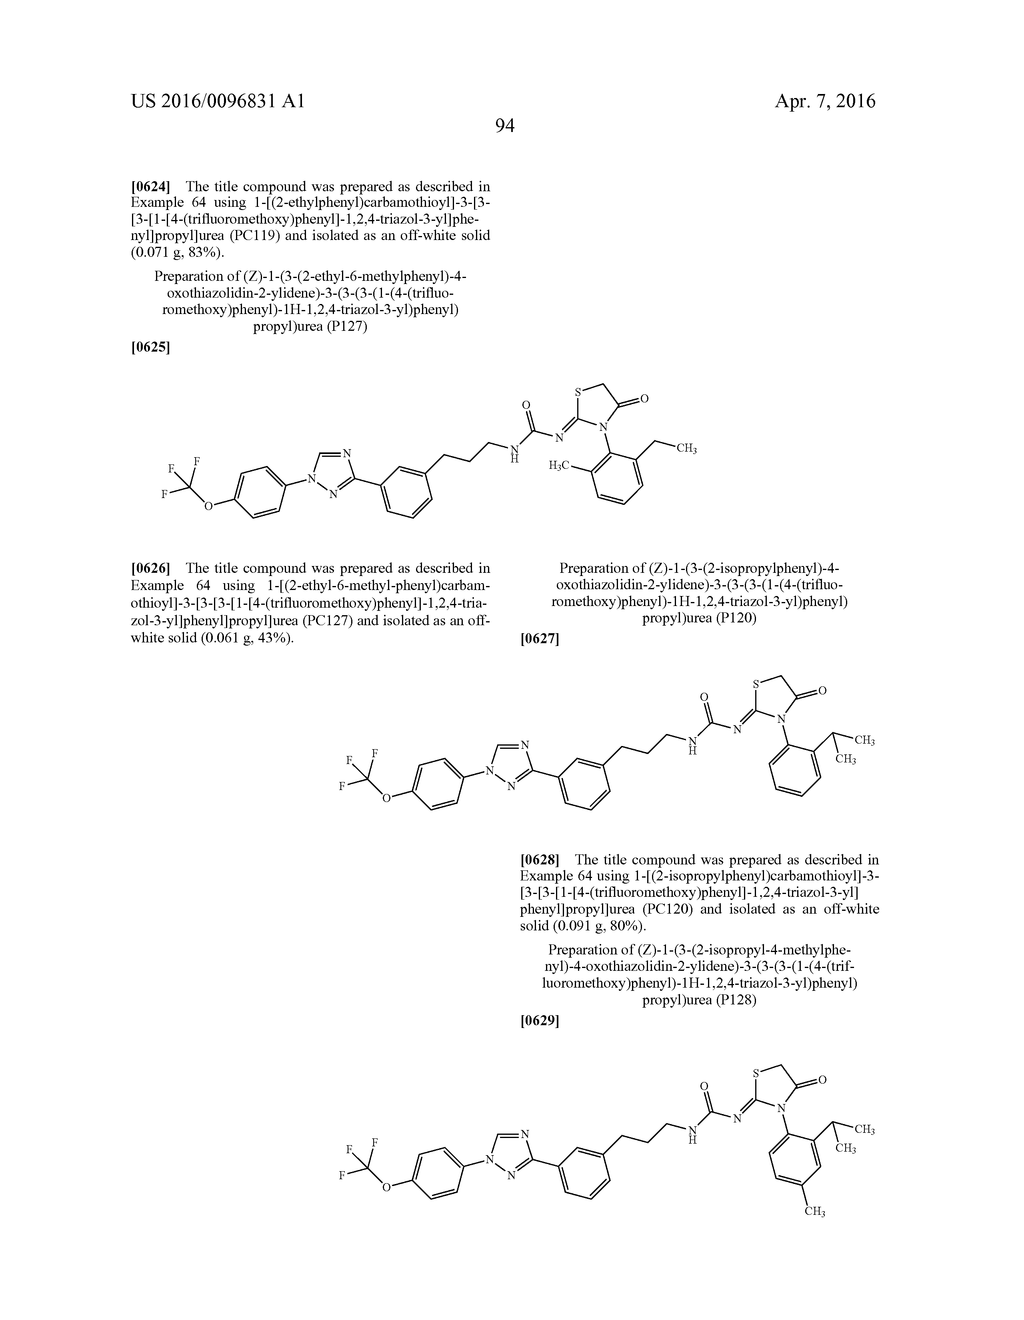 MOLECULES HAVING CERTAIN PESTICIDAL UTILITIES, AND INTERMEDIATES,     COMPOSITIONS, AND PROCESSES RELATED THERETO - diagram, schematic, and image 95